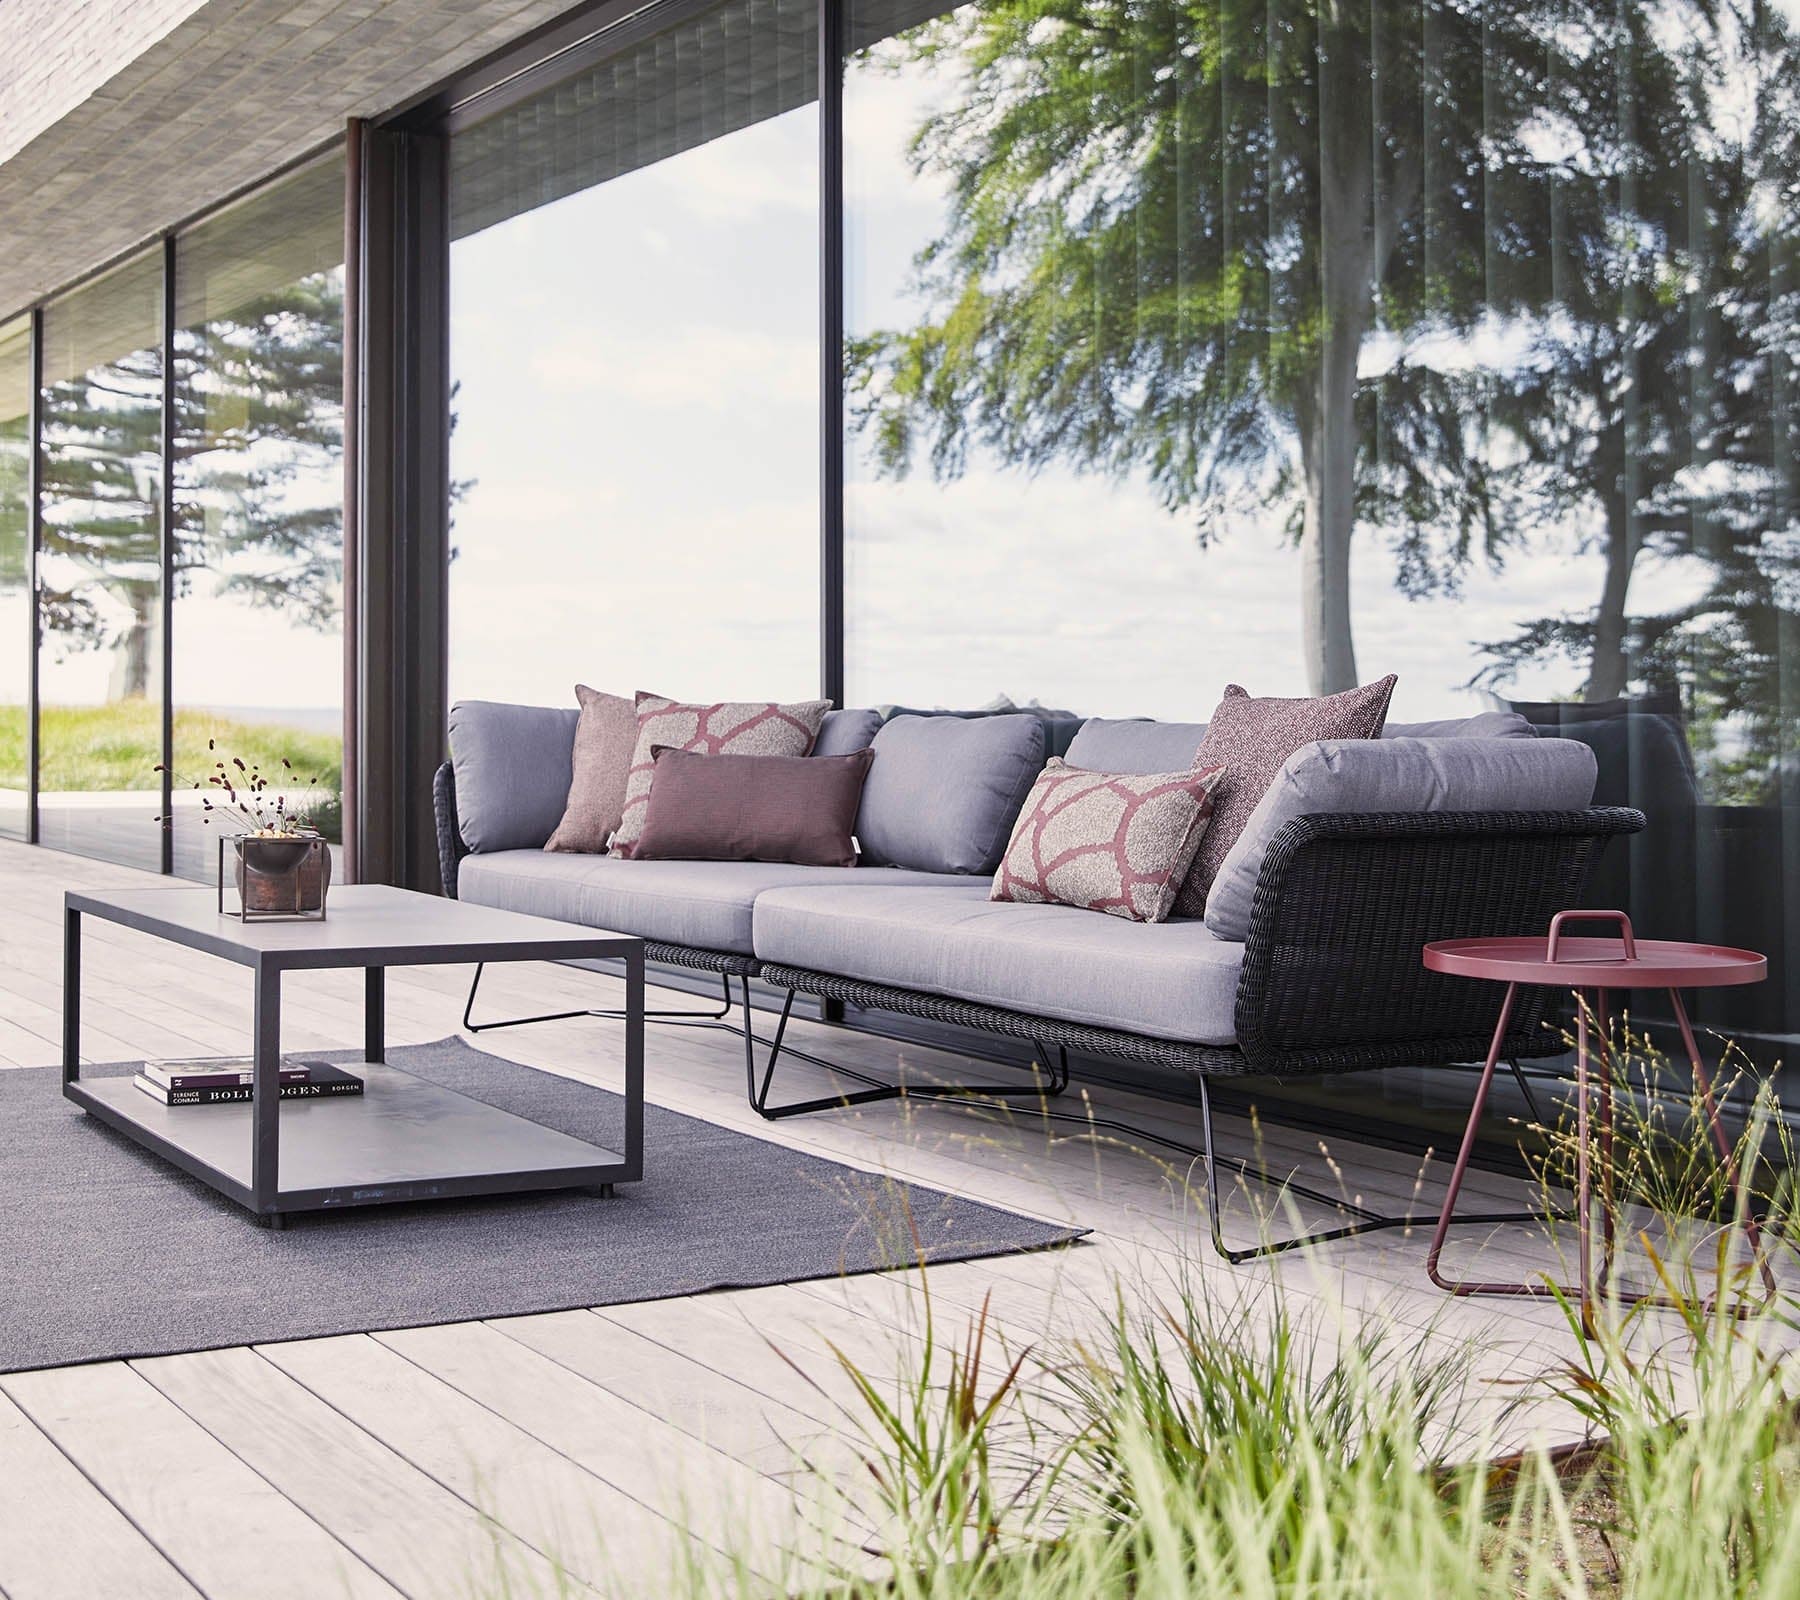 Boxhill's Horizon 2-Seater Outdoor Right Module Sofa lifestyle image together with Horizon 2-Seater Outdoor Left Module Sofa beside glass wall at patio, with a rectangular table in front and small round side table at the side